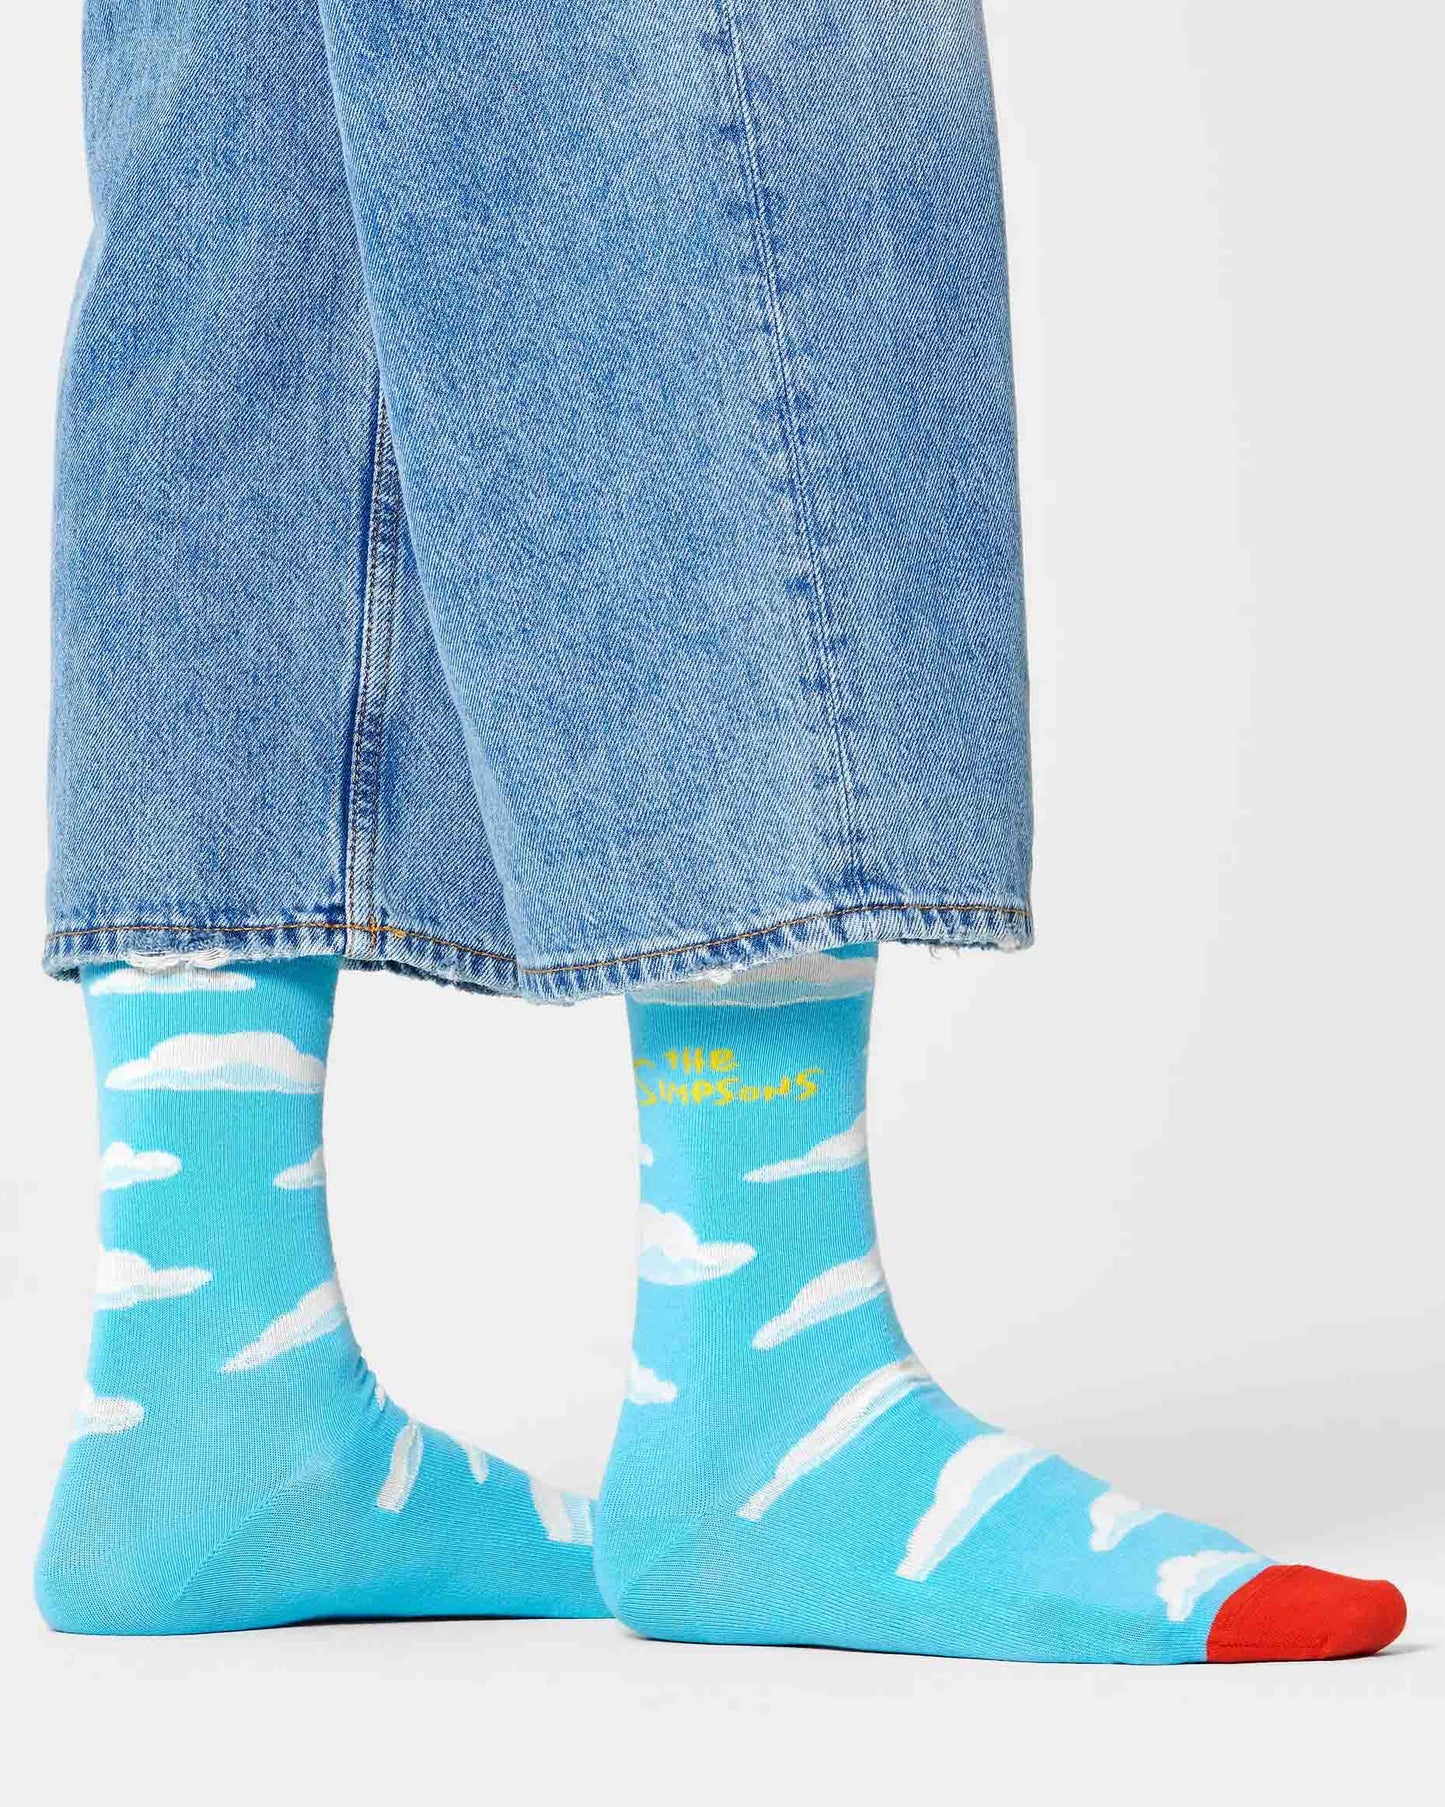 Happy Socks Clouds Socks - The Simpson's themed cotton crew length ankle socks with the opening title scene of clouds and The Simpson's logo in yellow and red toe, worn with cropped denim jeans.